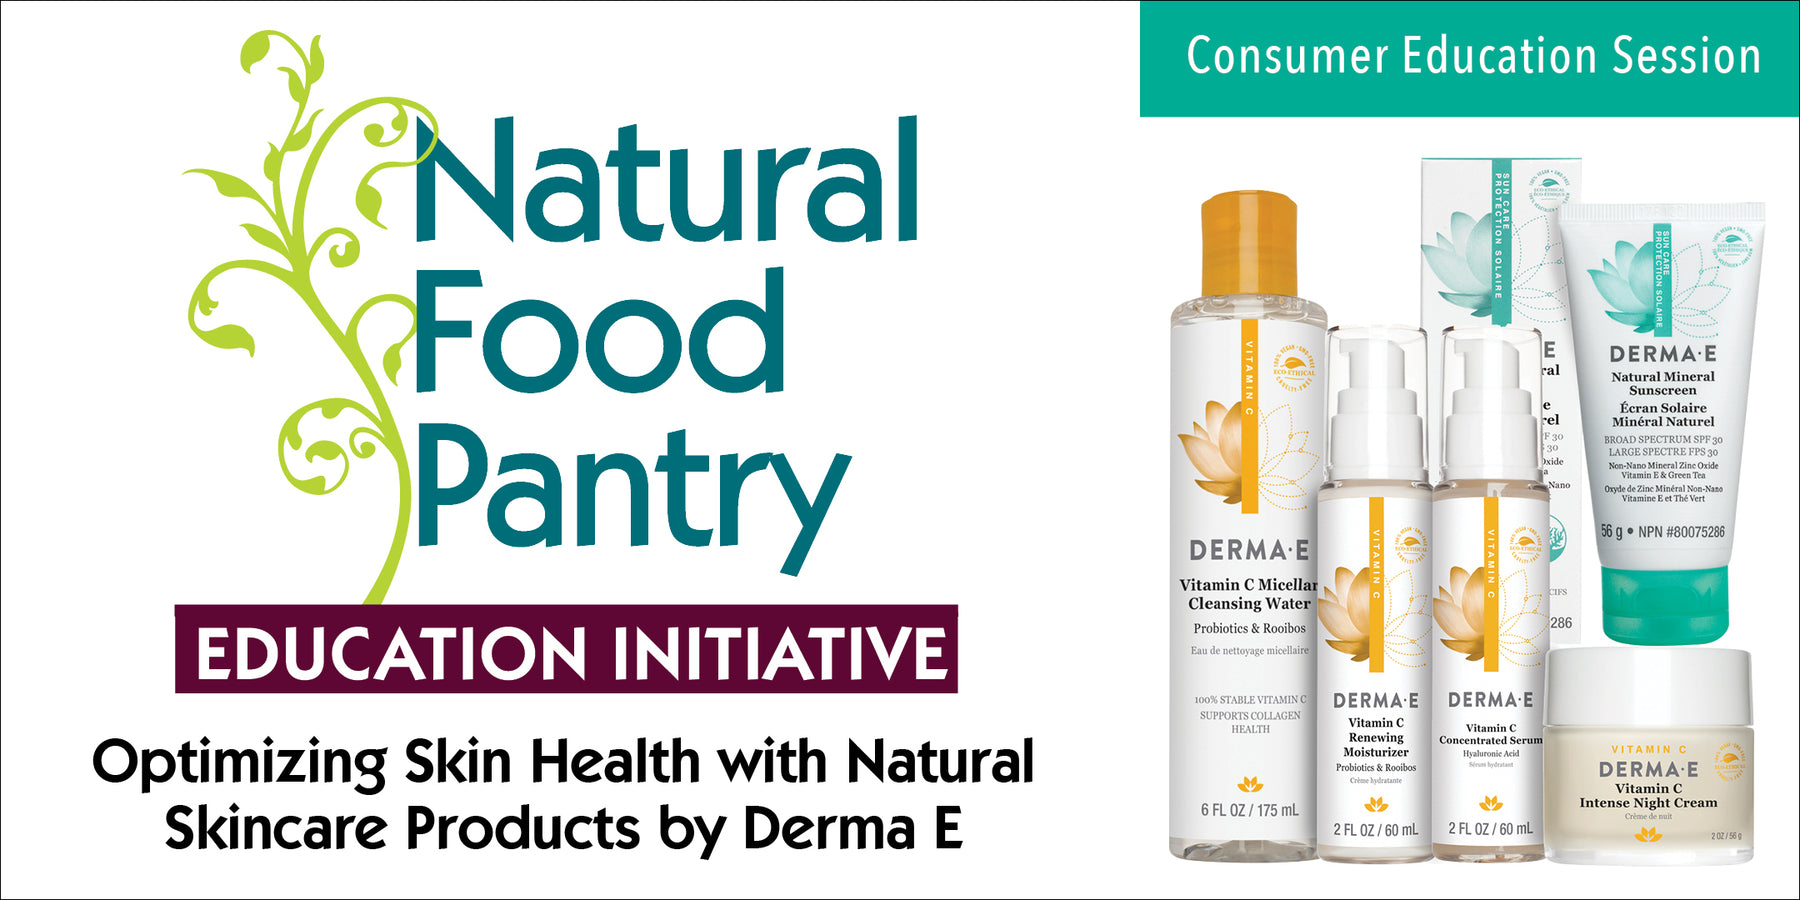 May 8: Optimizing Skin Health with Derma E Natural Skincare Products